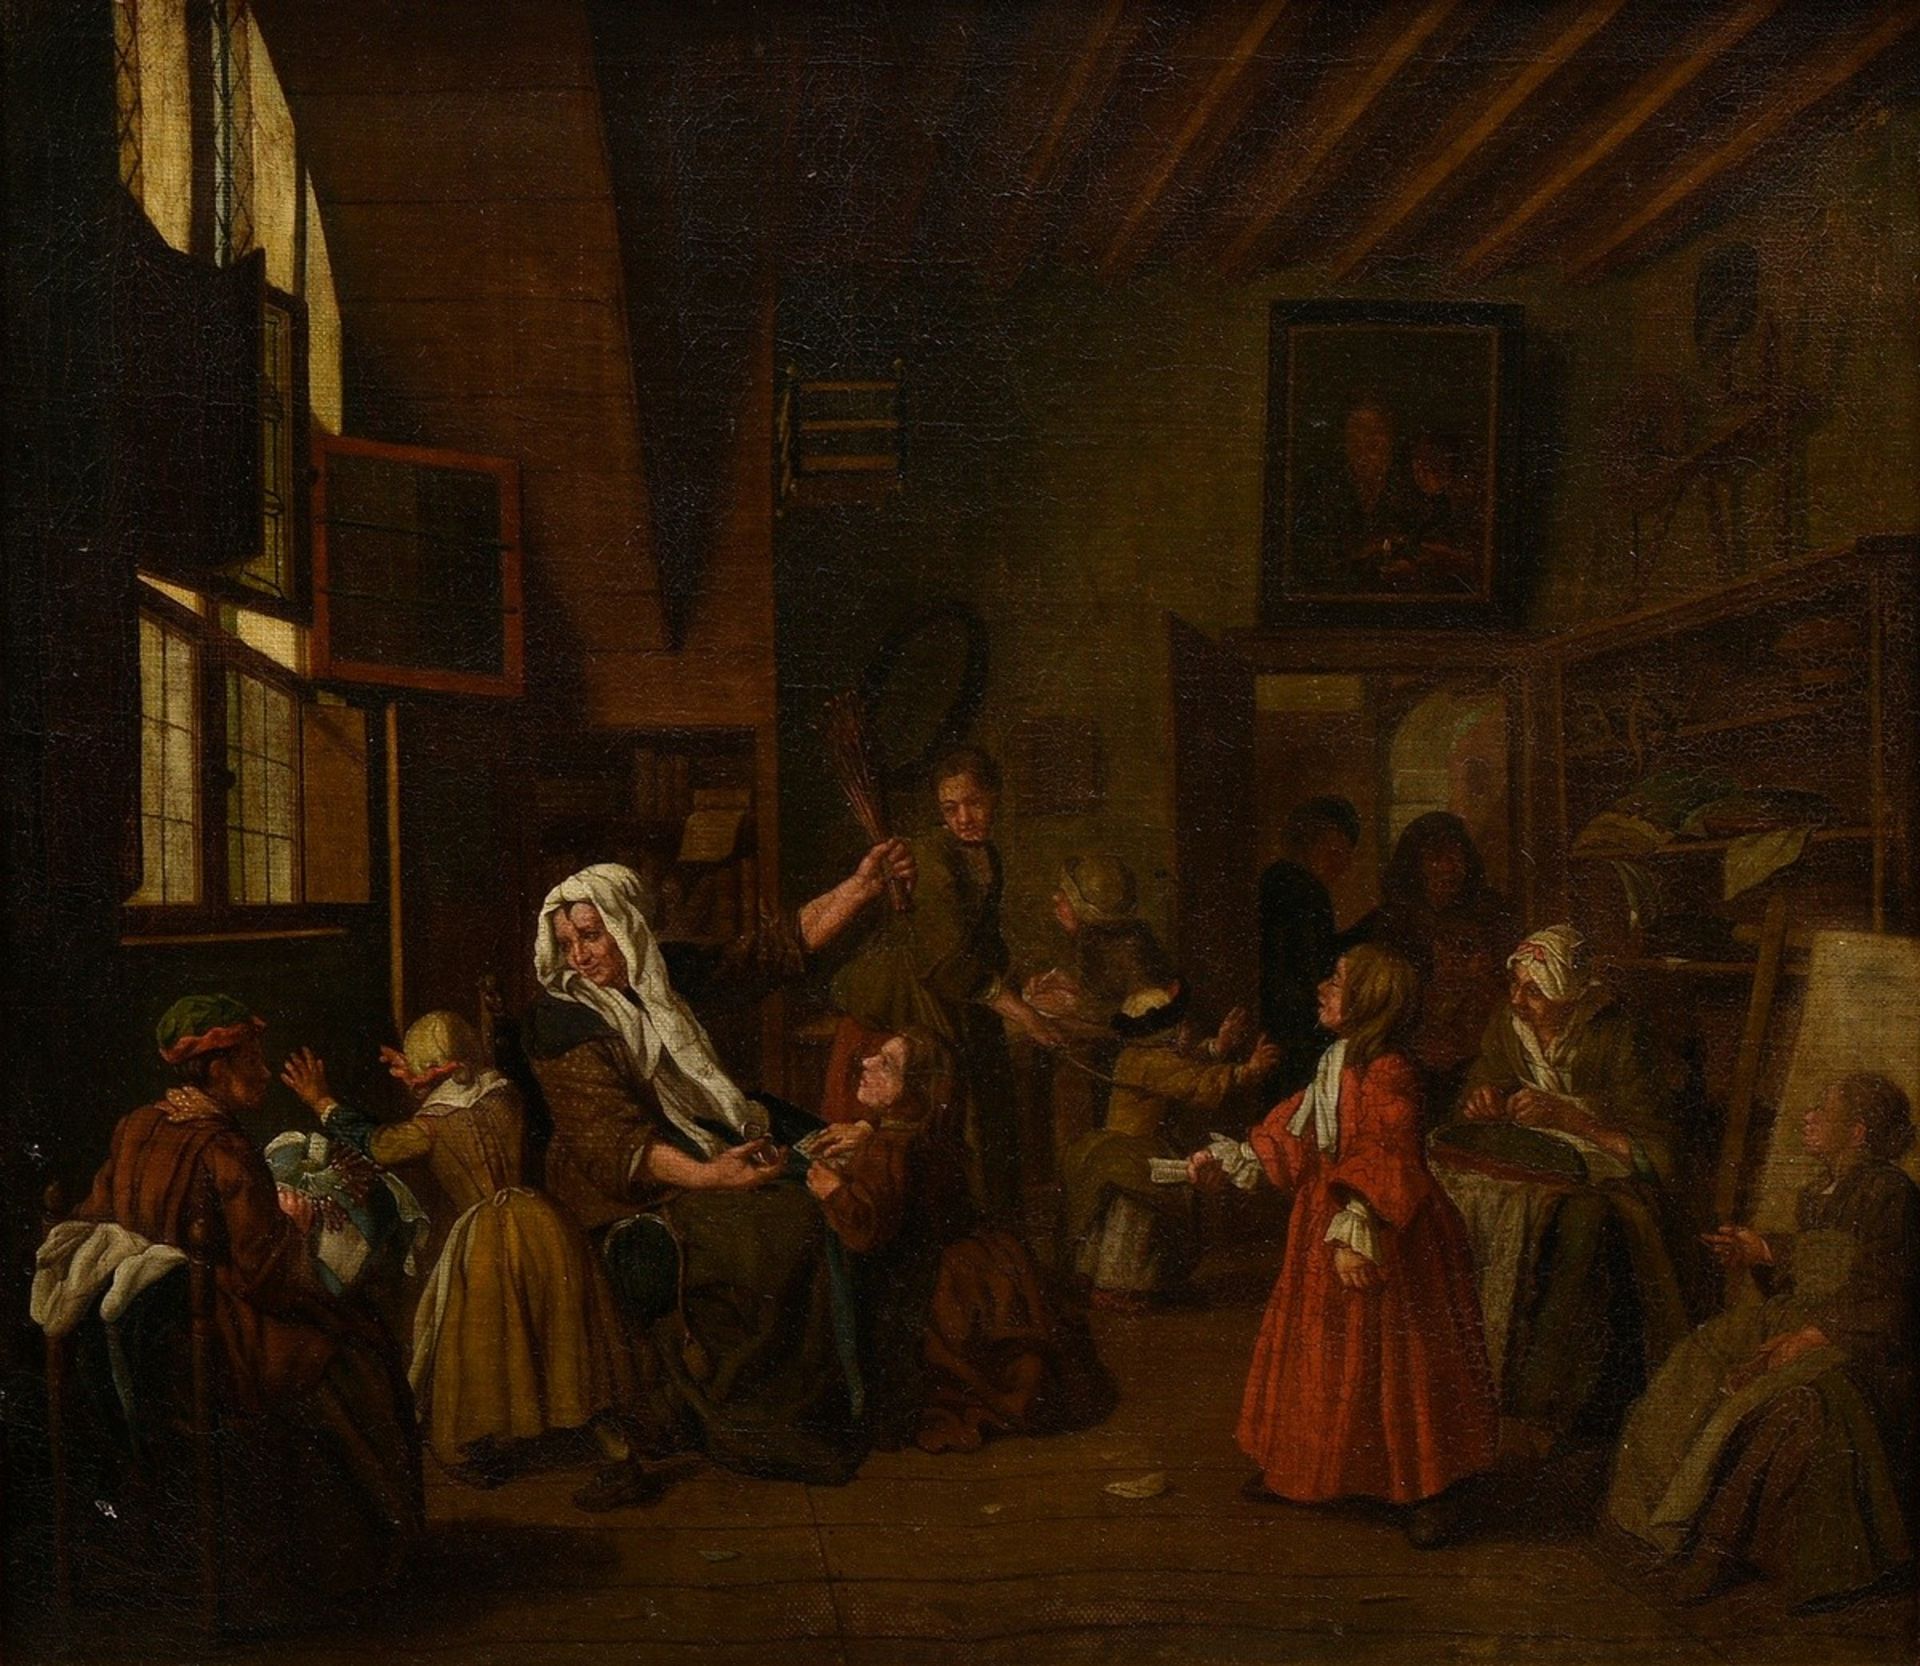 Horemans, Jan Jozef II (1714-1792) attributed "Interior with twelve persons engaged in various acti